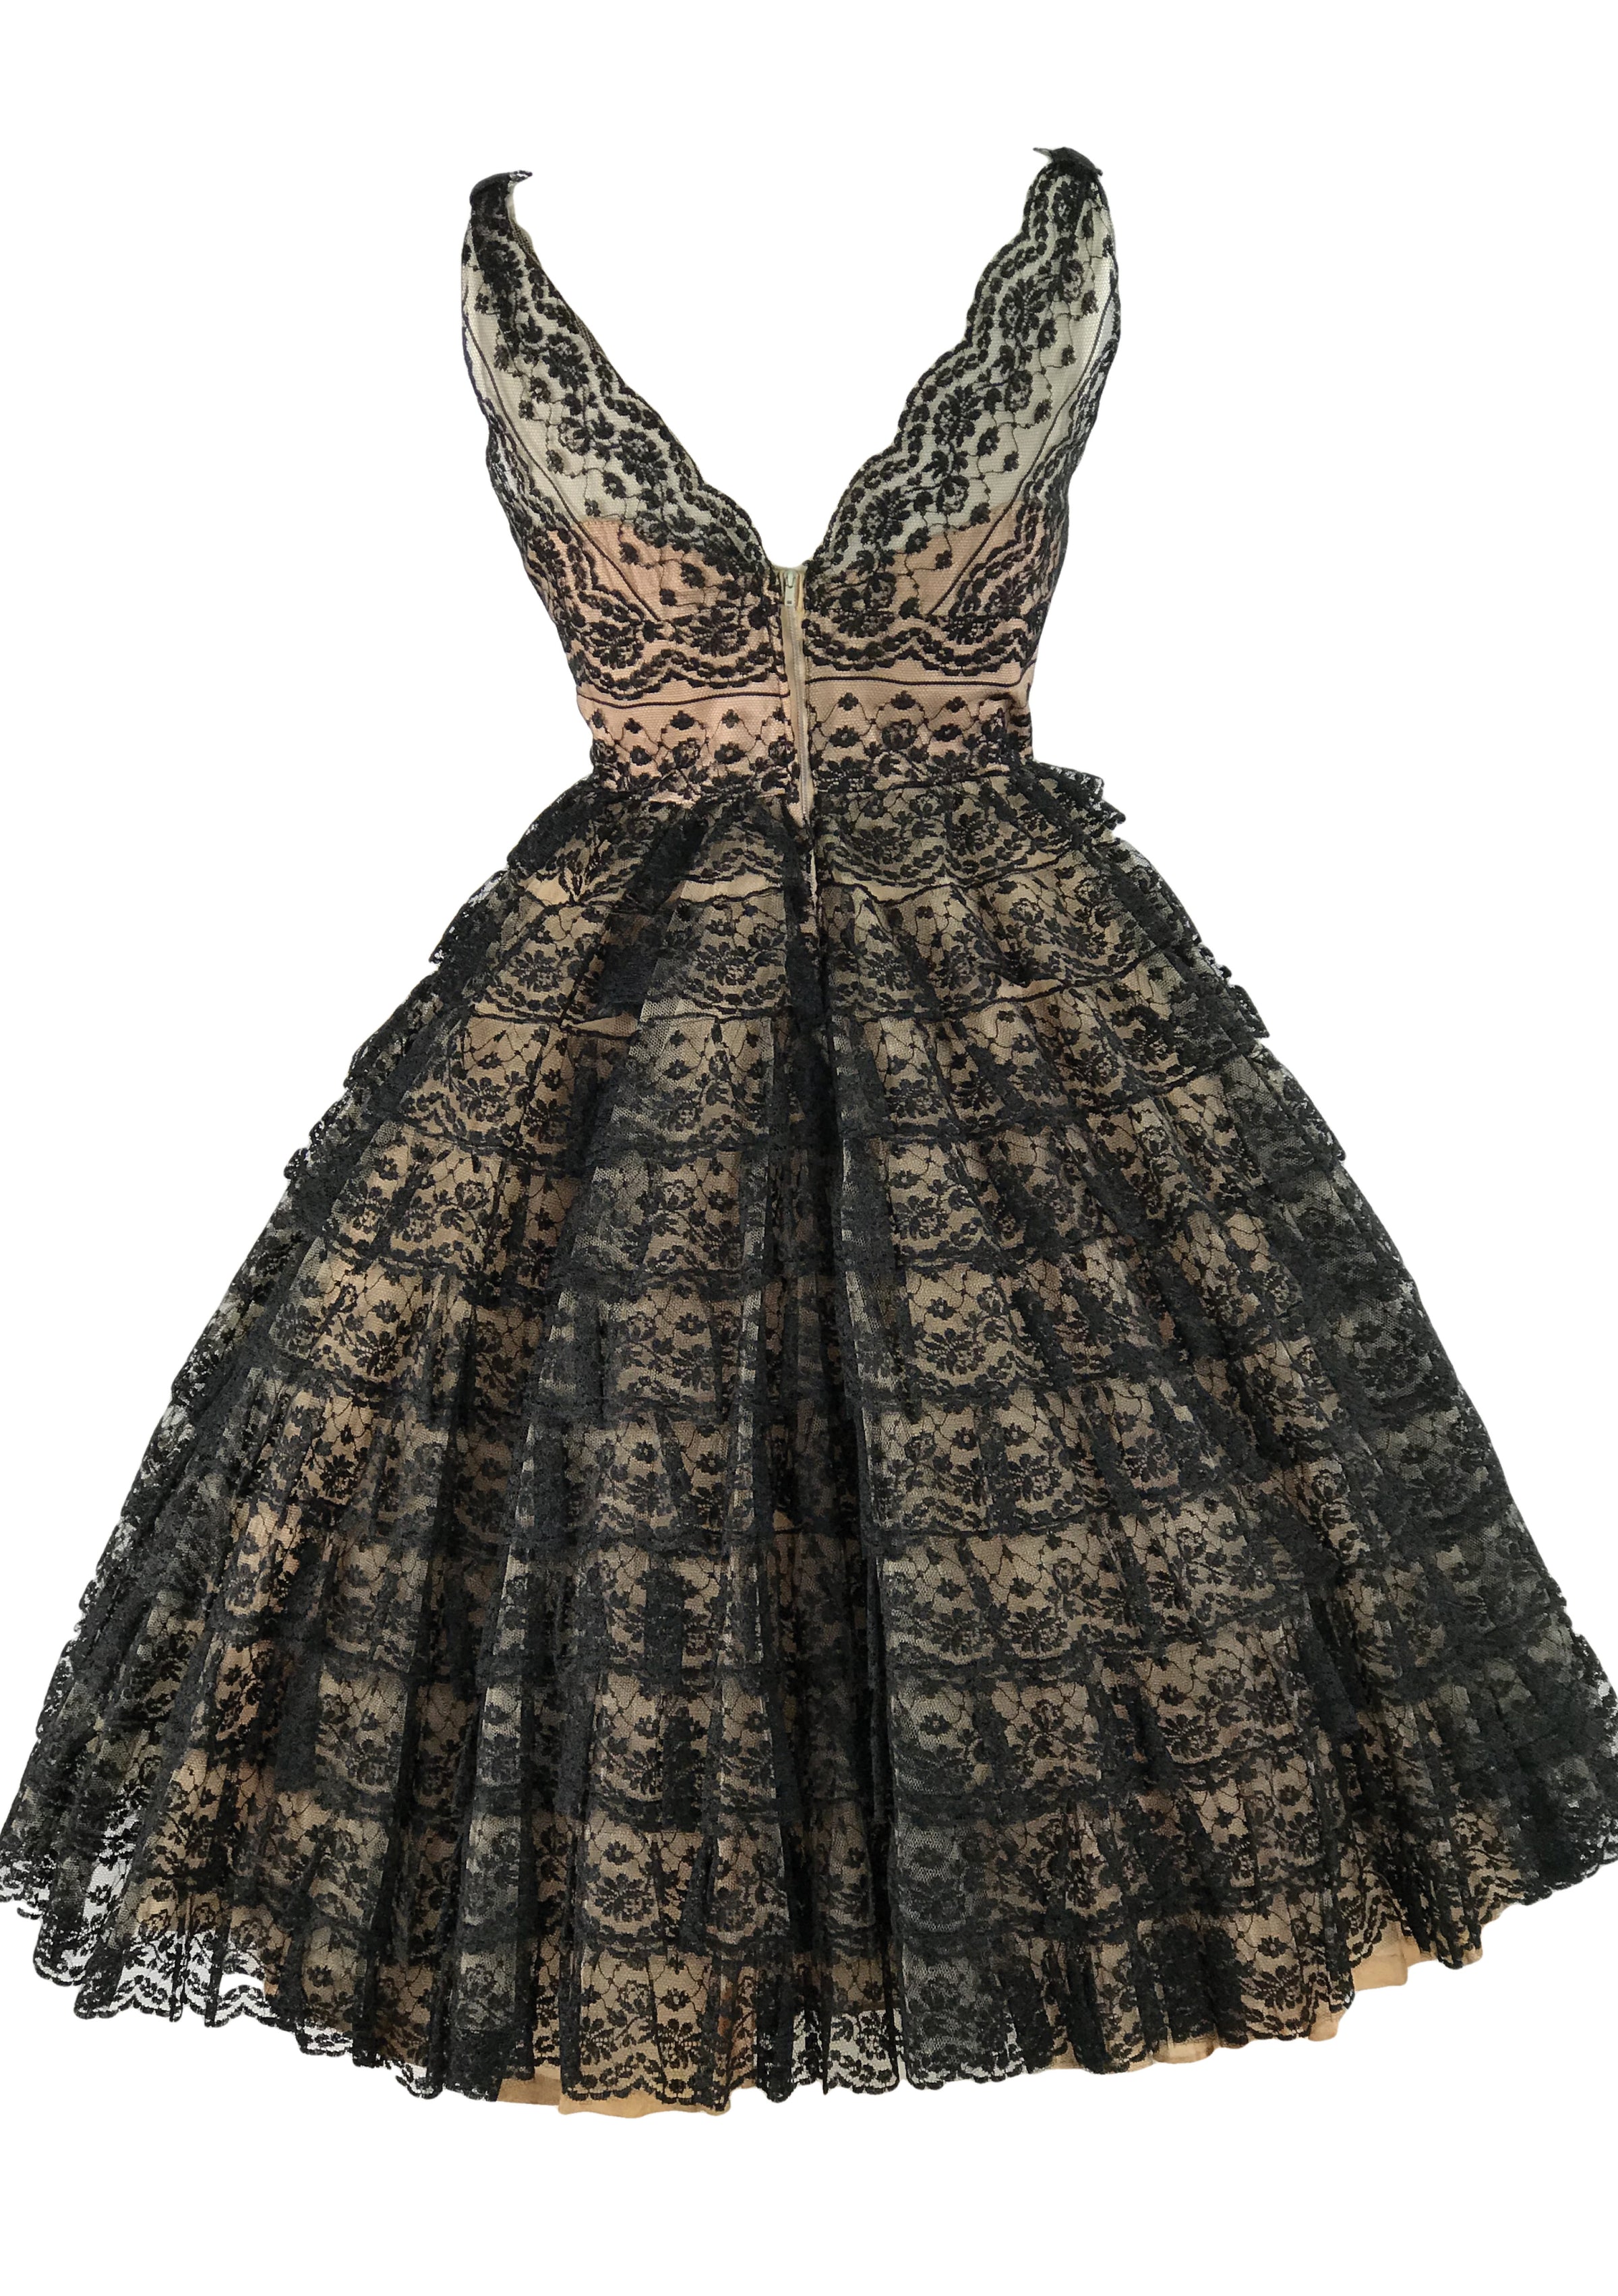 Spectacular 1950s Black Lace Cocktail Dress- New! – Coutura Vintage